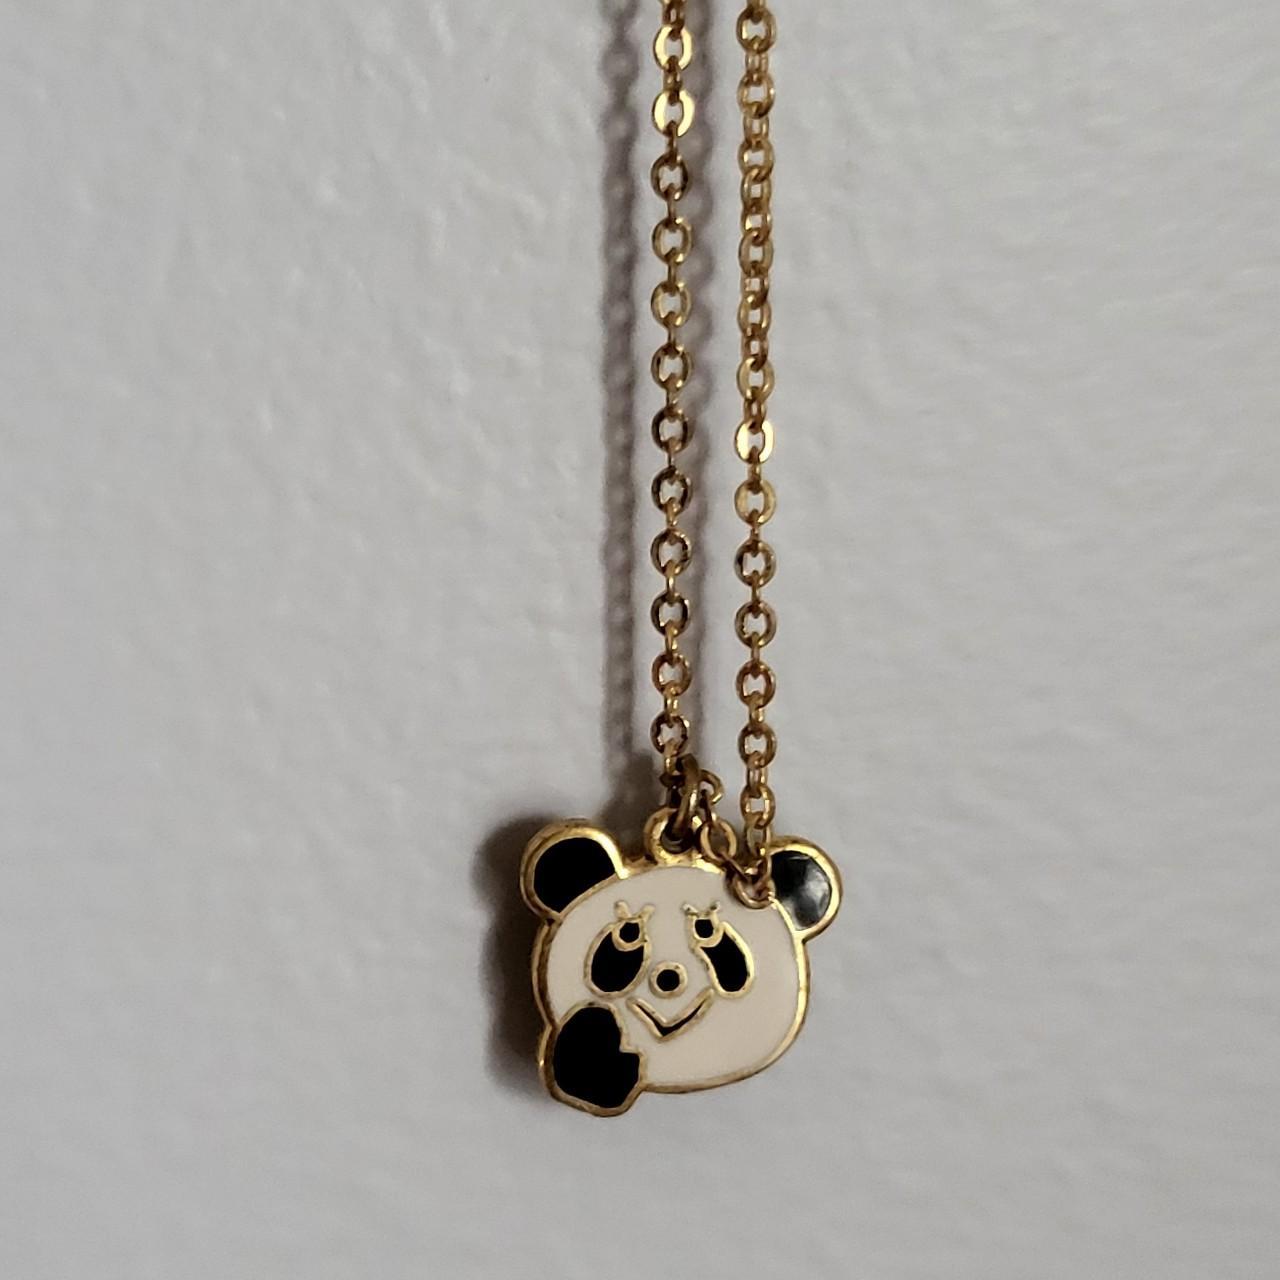 Panda Necklace With Earrings for Girls and Women (Necklace With Earrings)